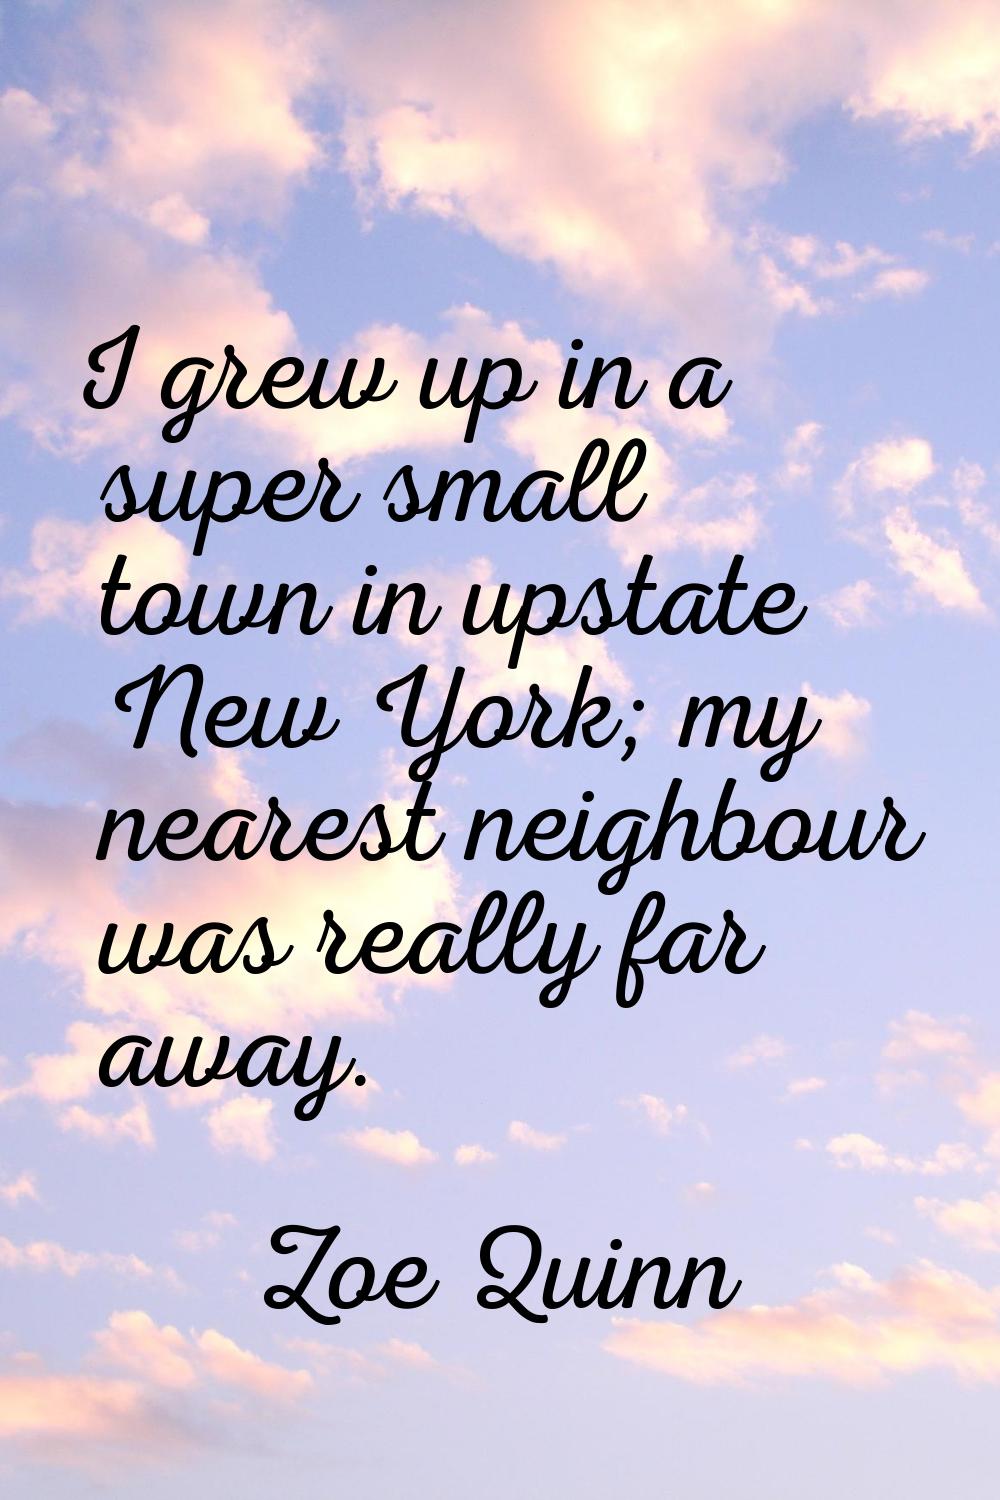 I grew up in a super small town in upstate New York; my nearest neighbour was really far away.